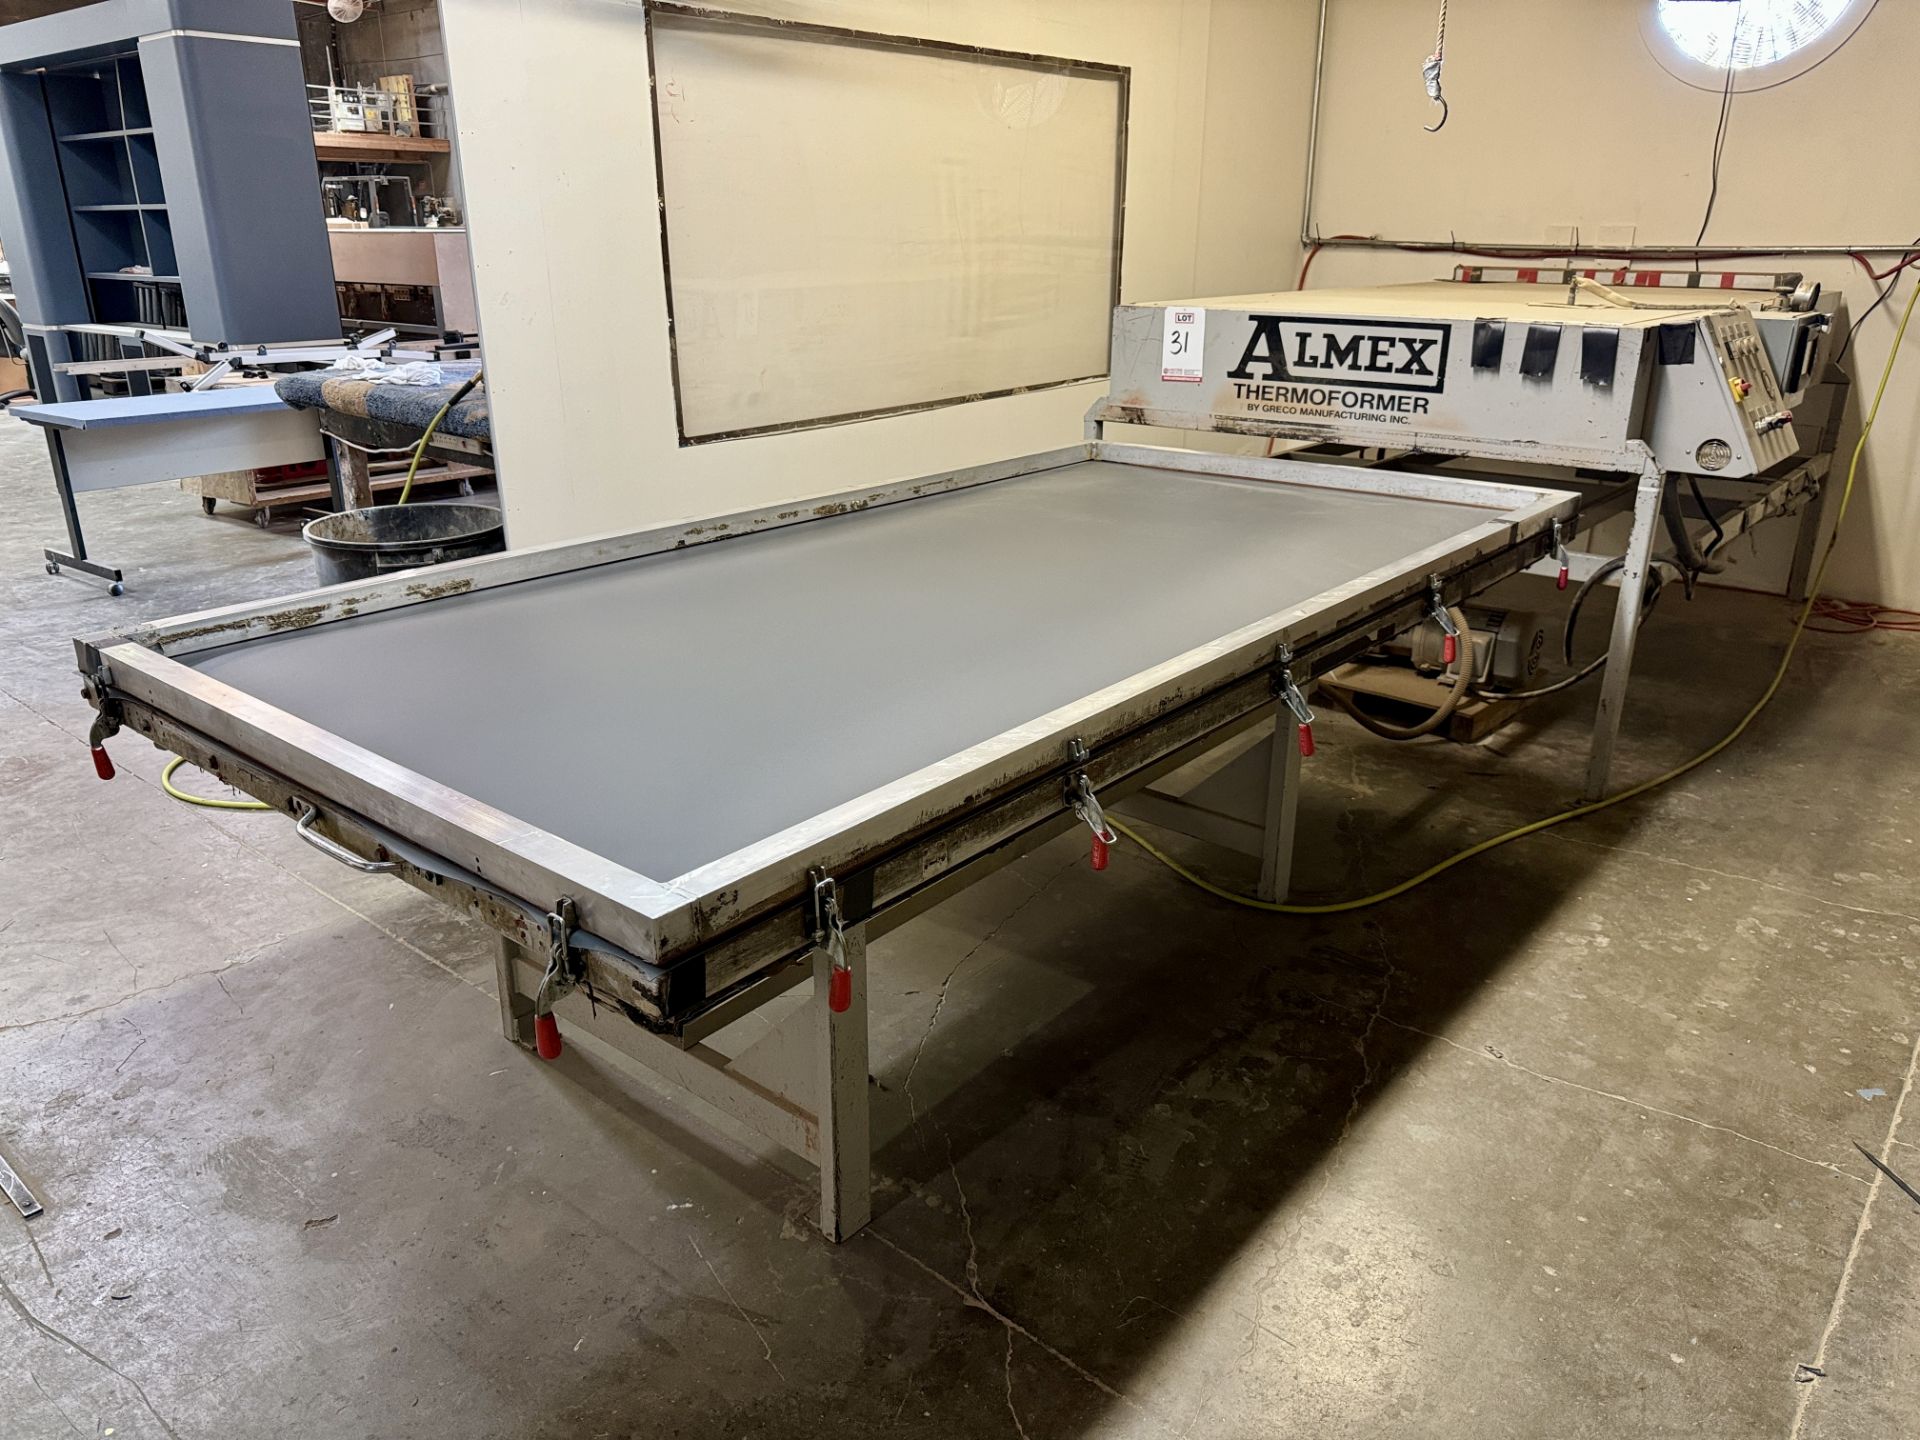 ALMEX THERMOFORMER VACUUM PRESS, 52" X 107" AIR TABLE - Image 5 of 20